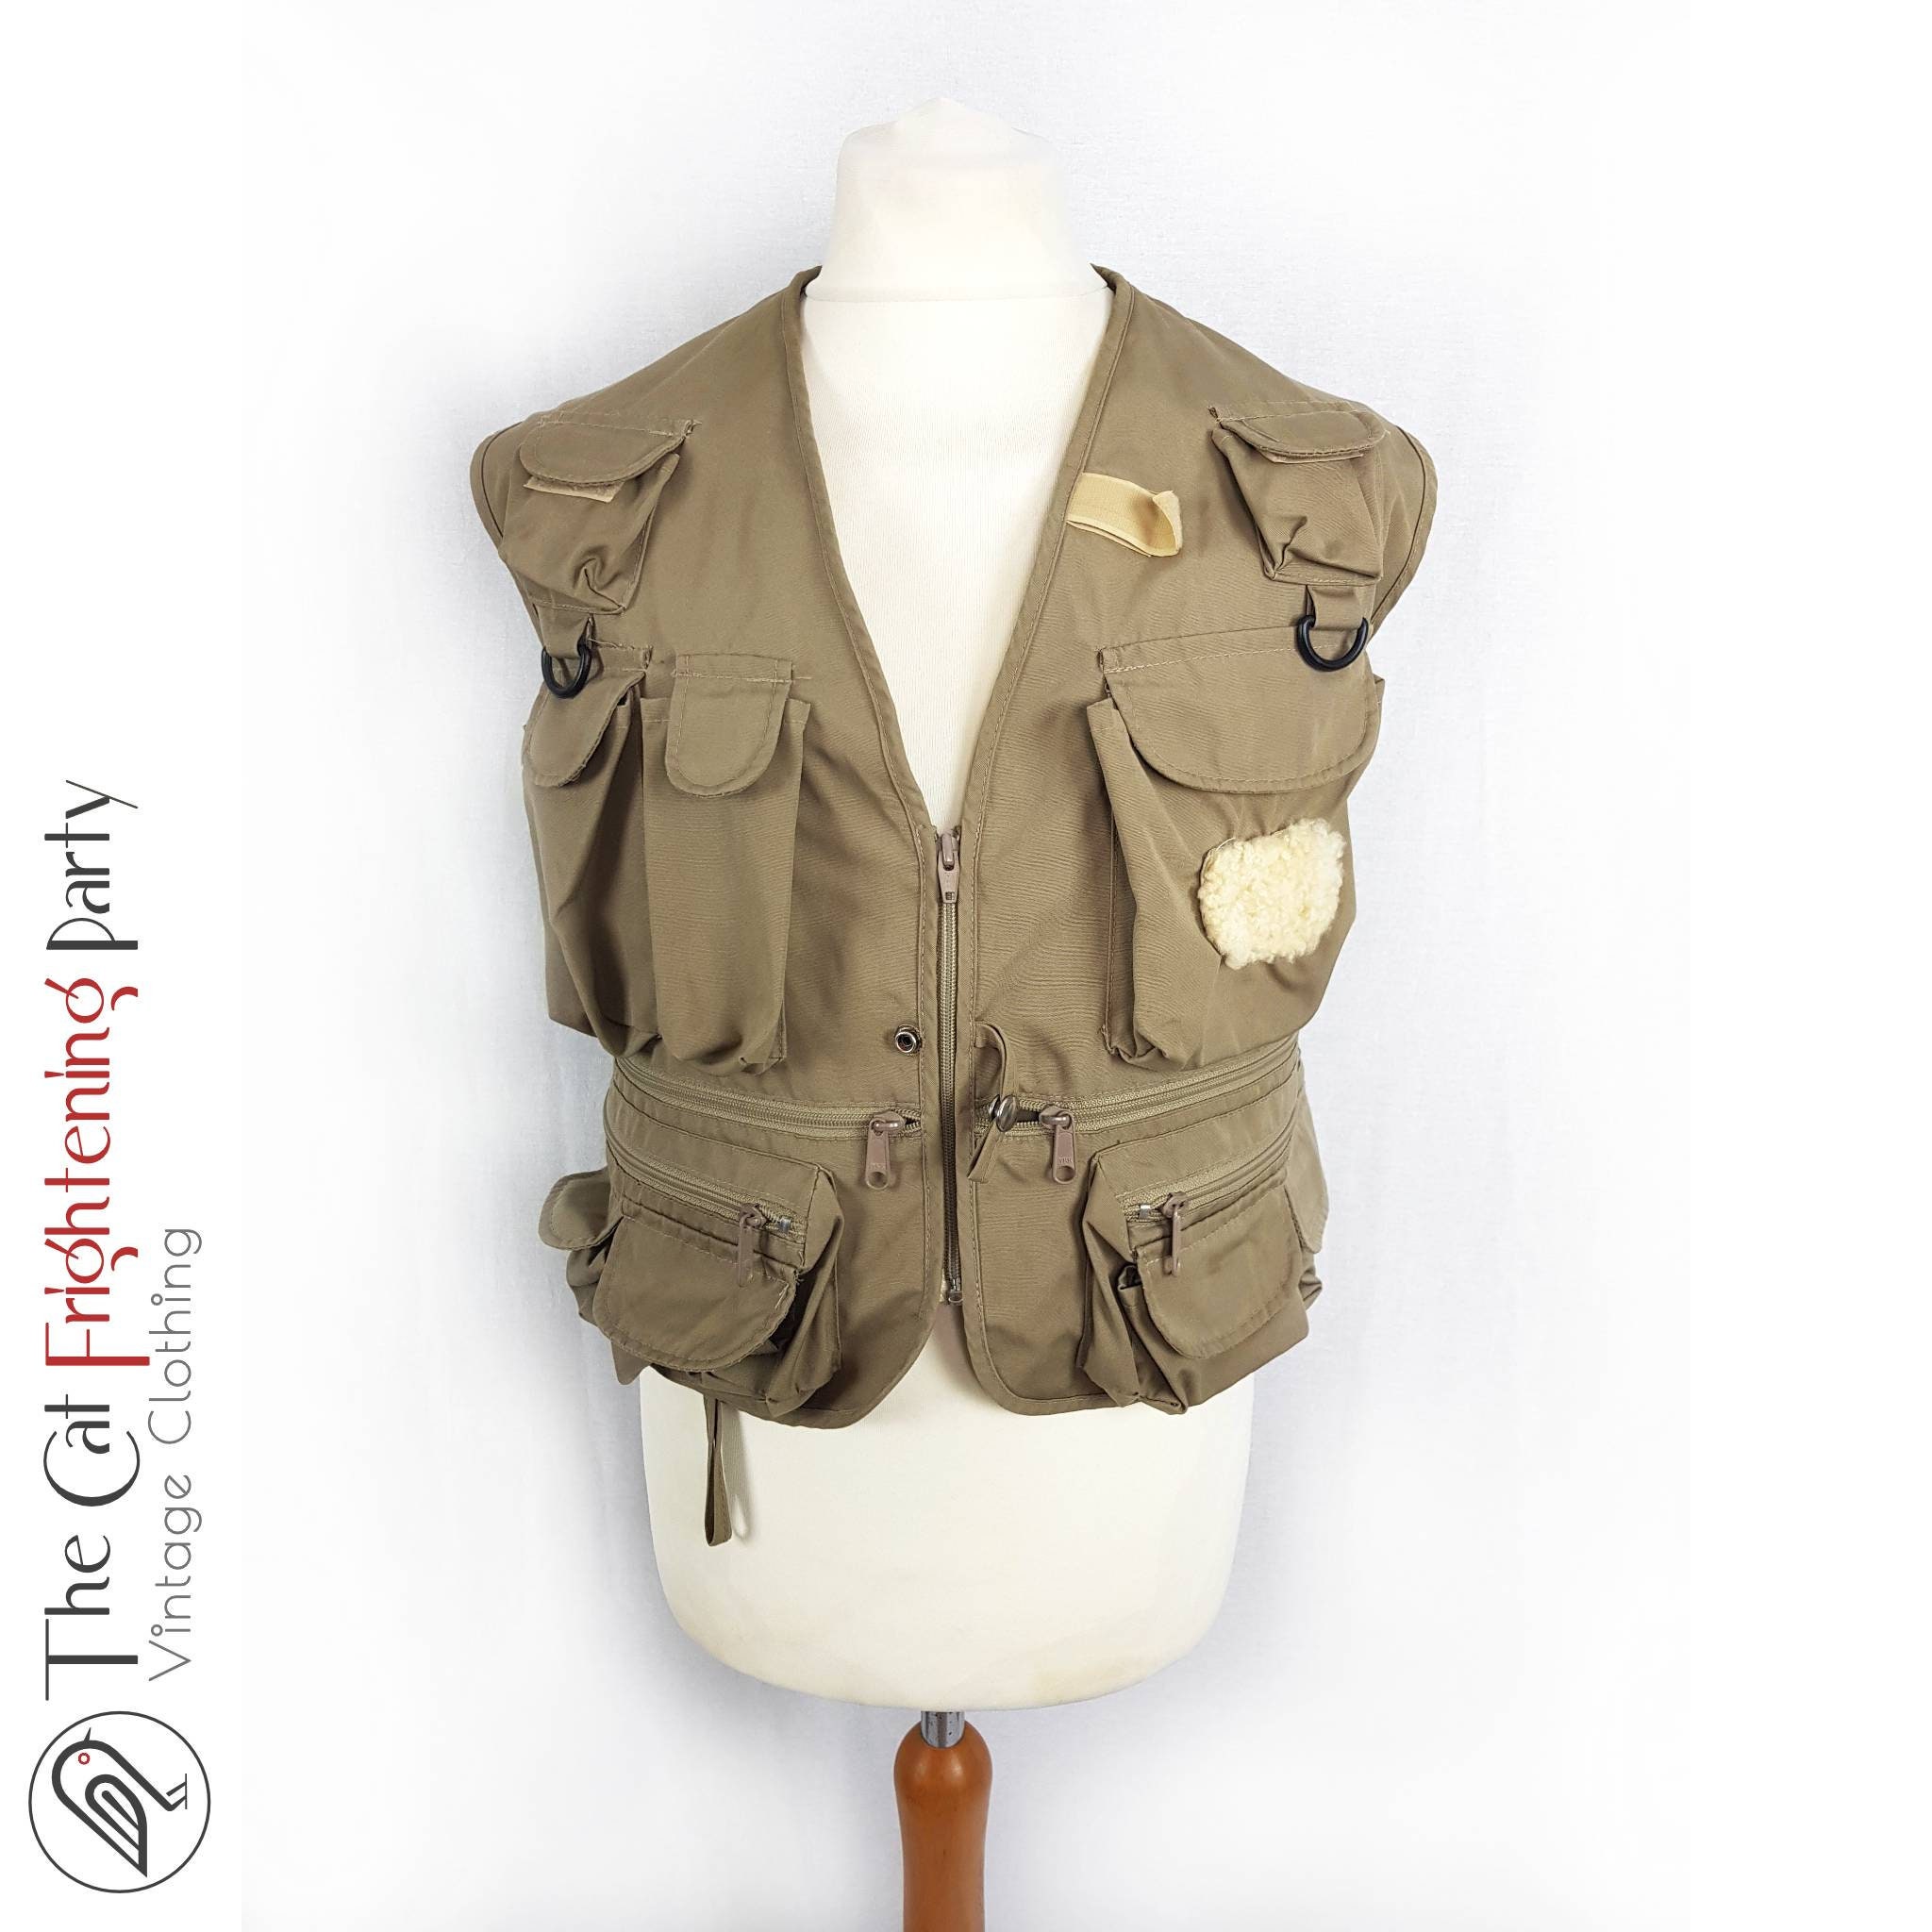 Fishing Gilet, Vest, Size Xl/46-48 Chest, the Compleat Angler Australia,  Waistcoat, Fly, Outdoors, Camping, Country Pursuits, Shooting, 